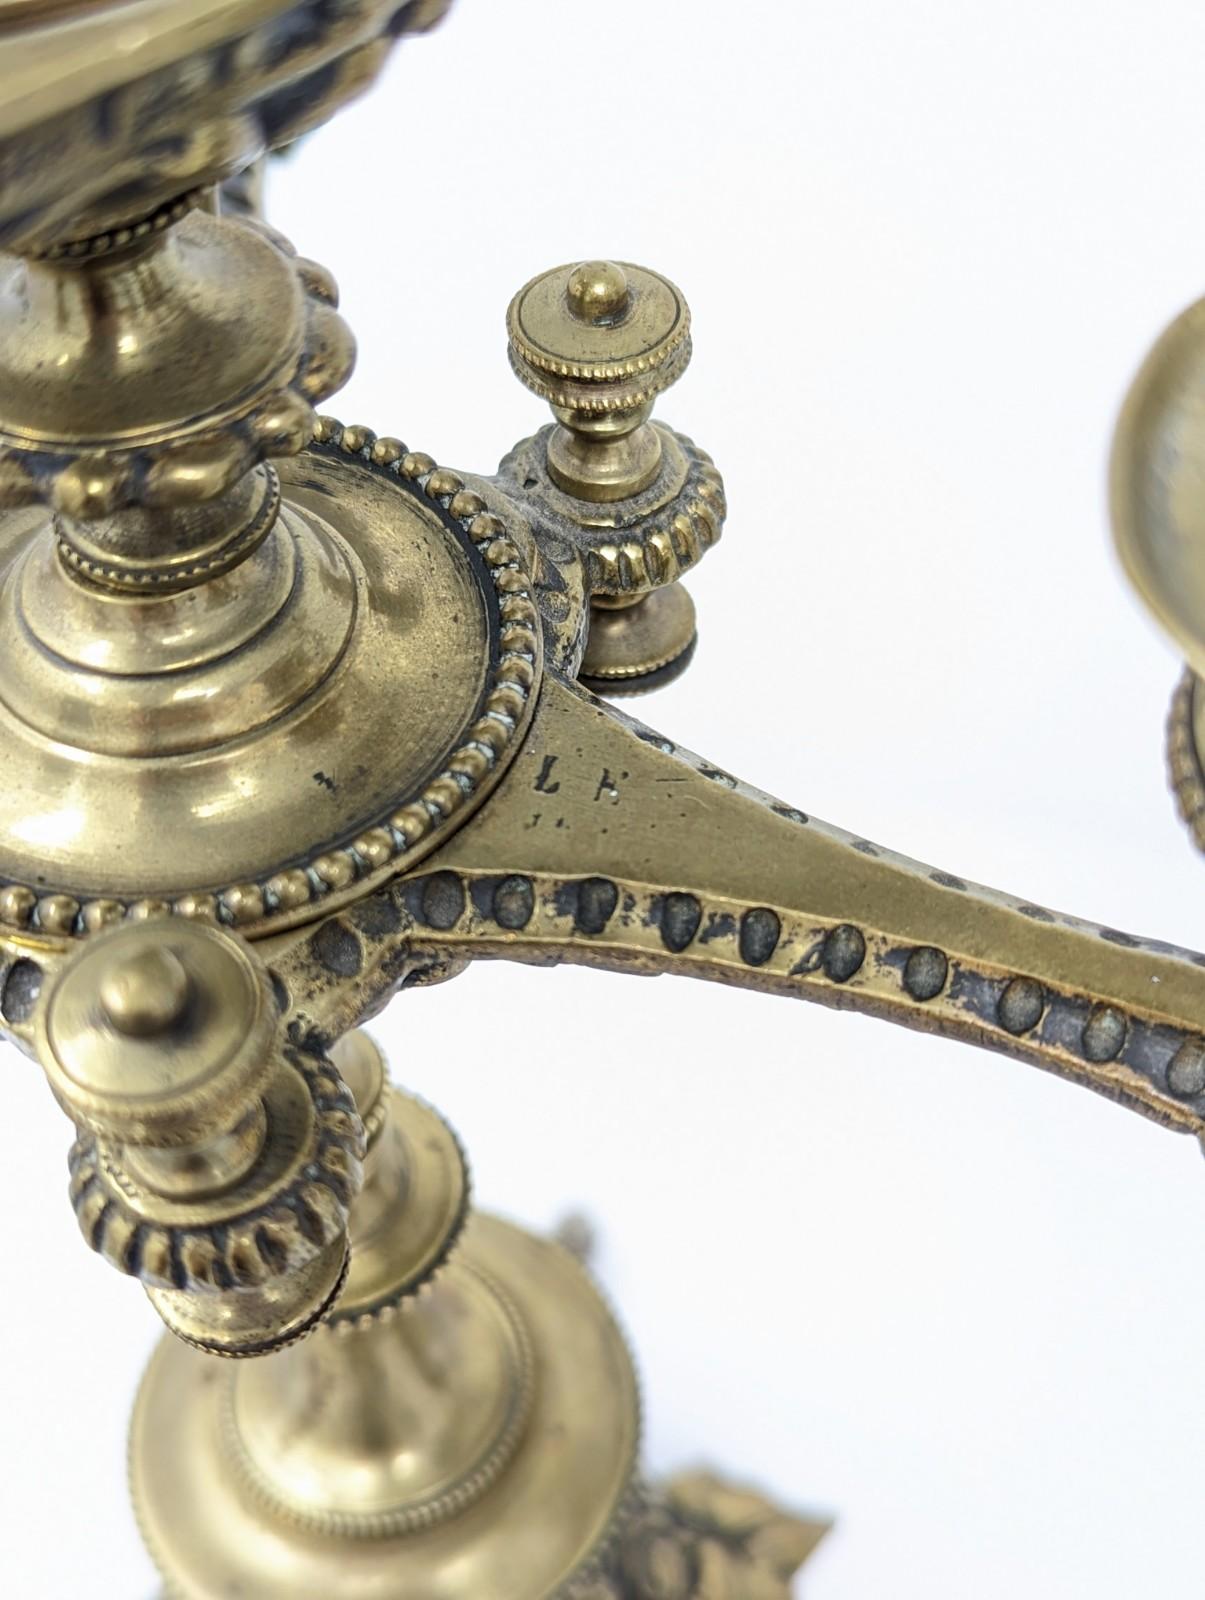 Pair of Antique Candelabras, 19th Century European Brass Candlesticks Footed In Fair Condition For Sale In Greer, SC